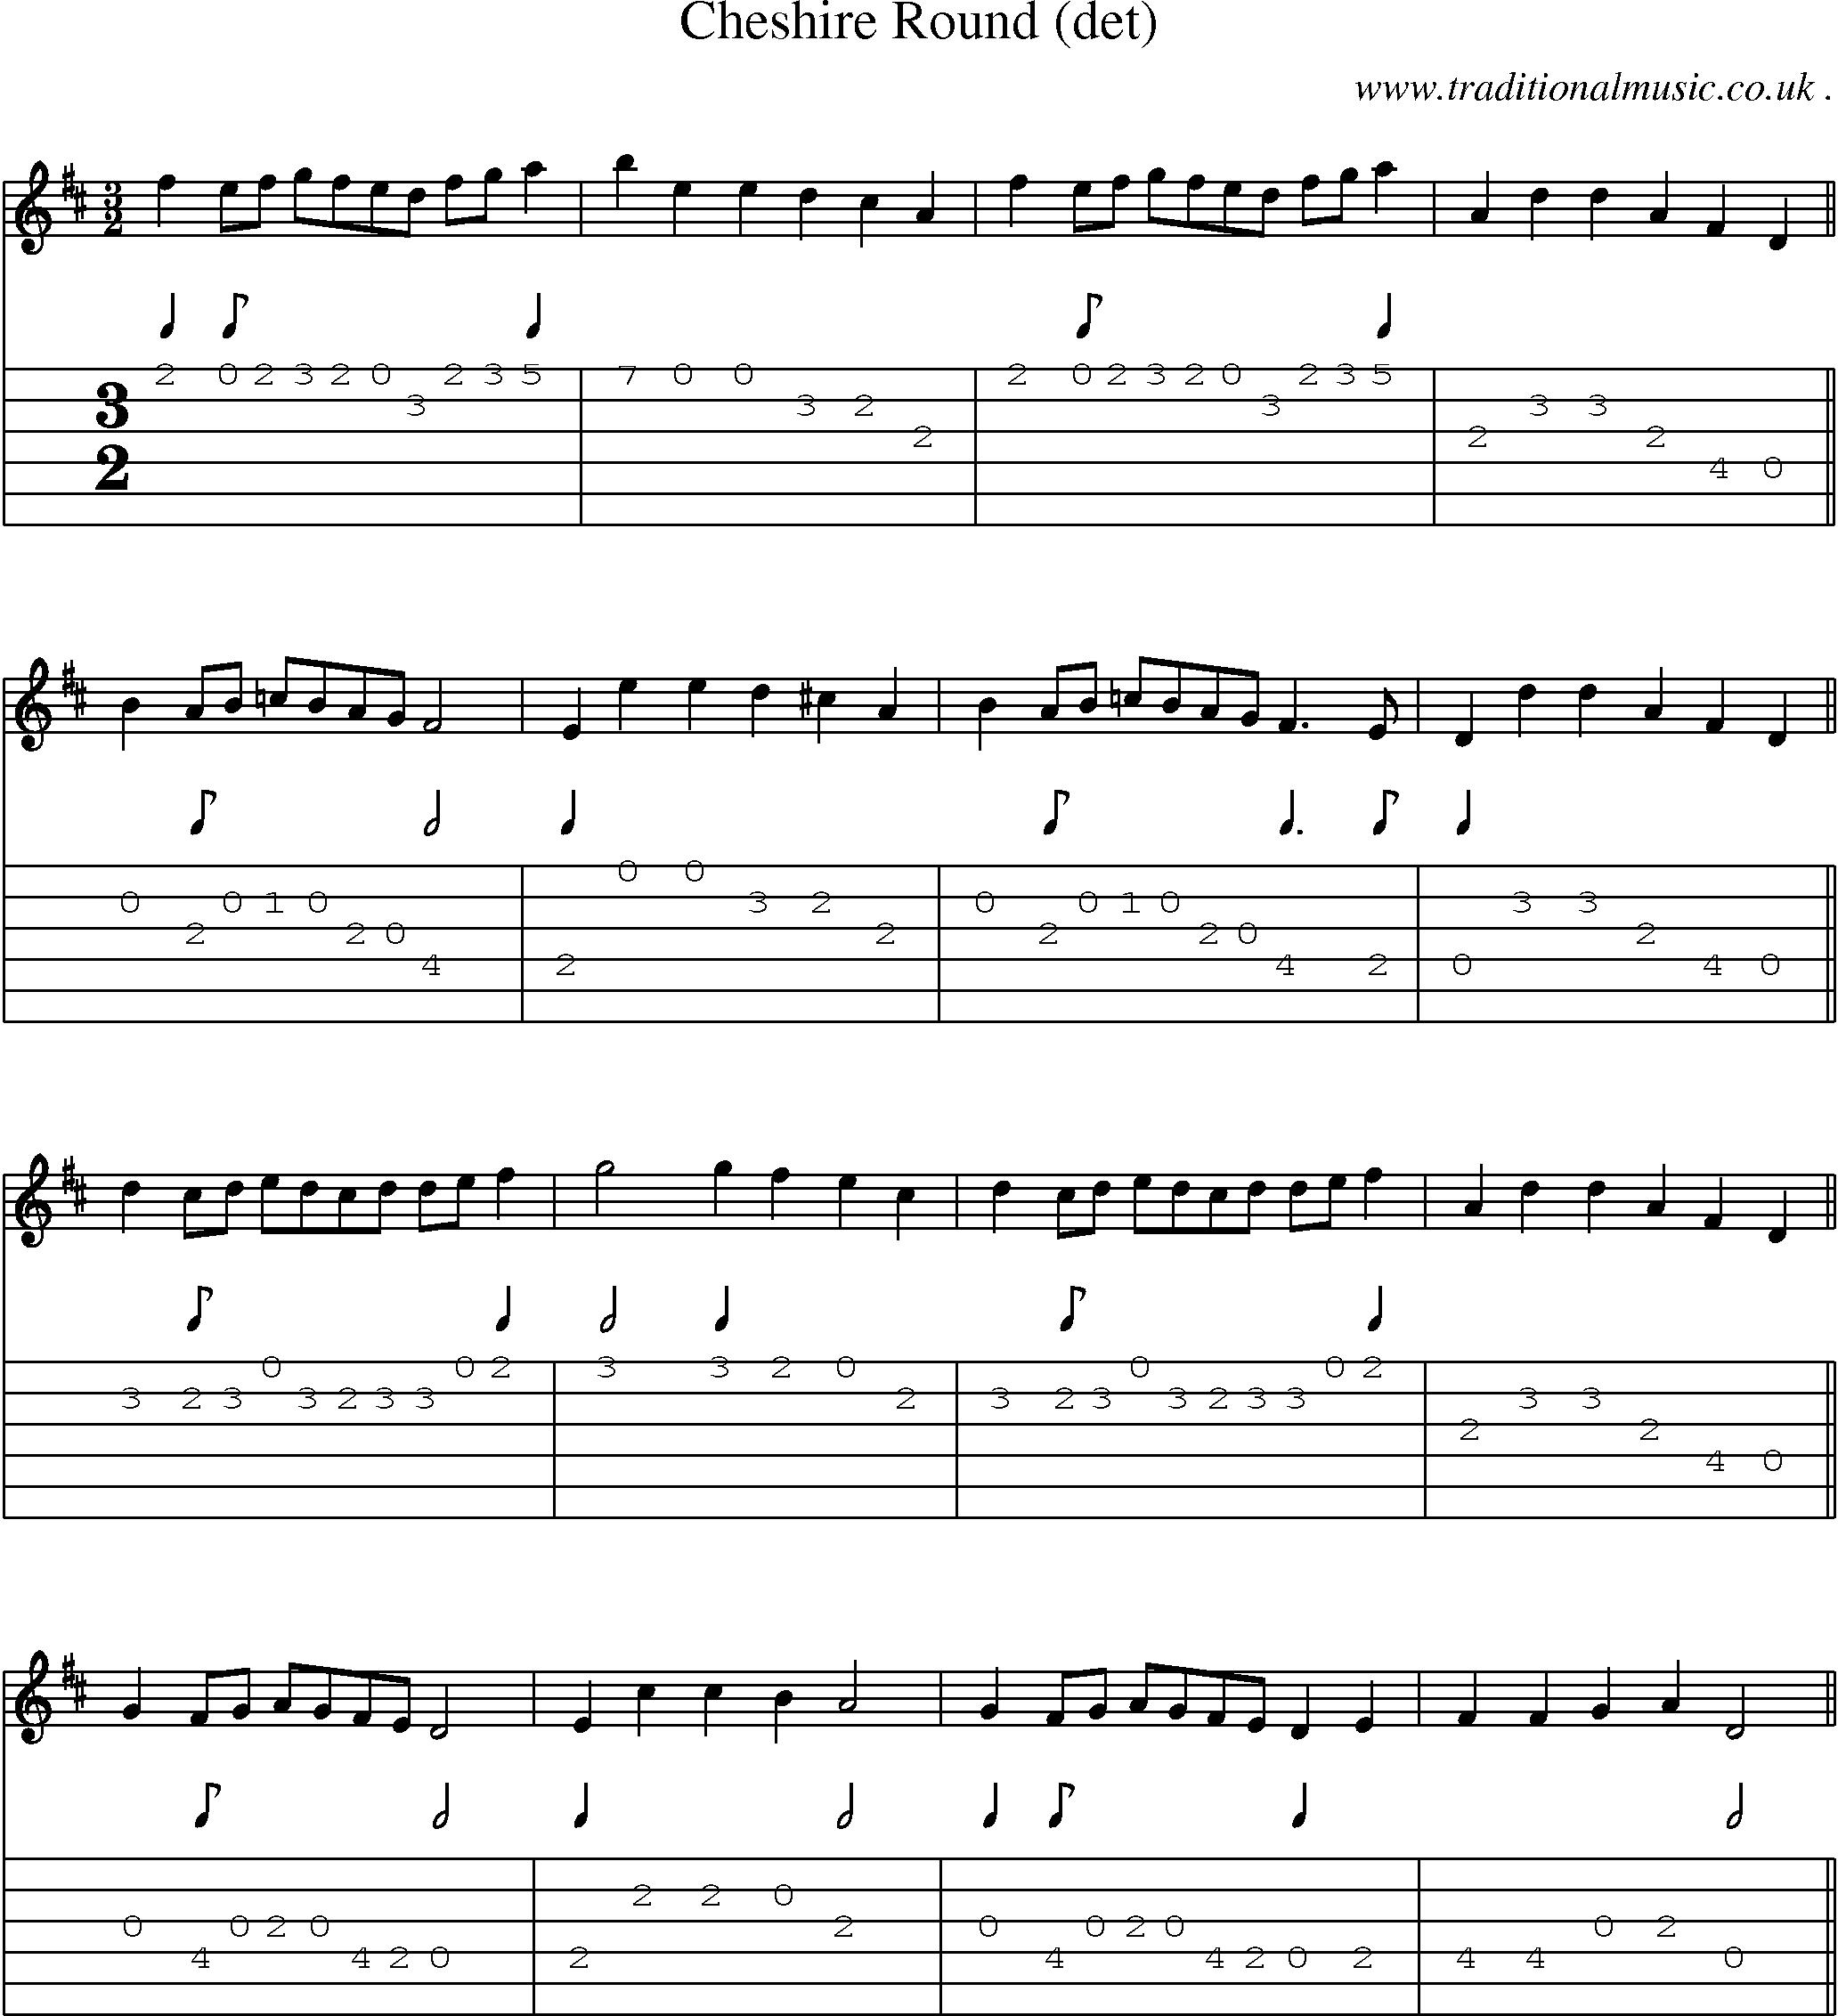 Sheet-Music and Guitar Tabs for Cheshire Round (det)